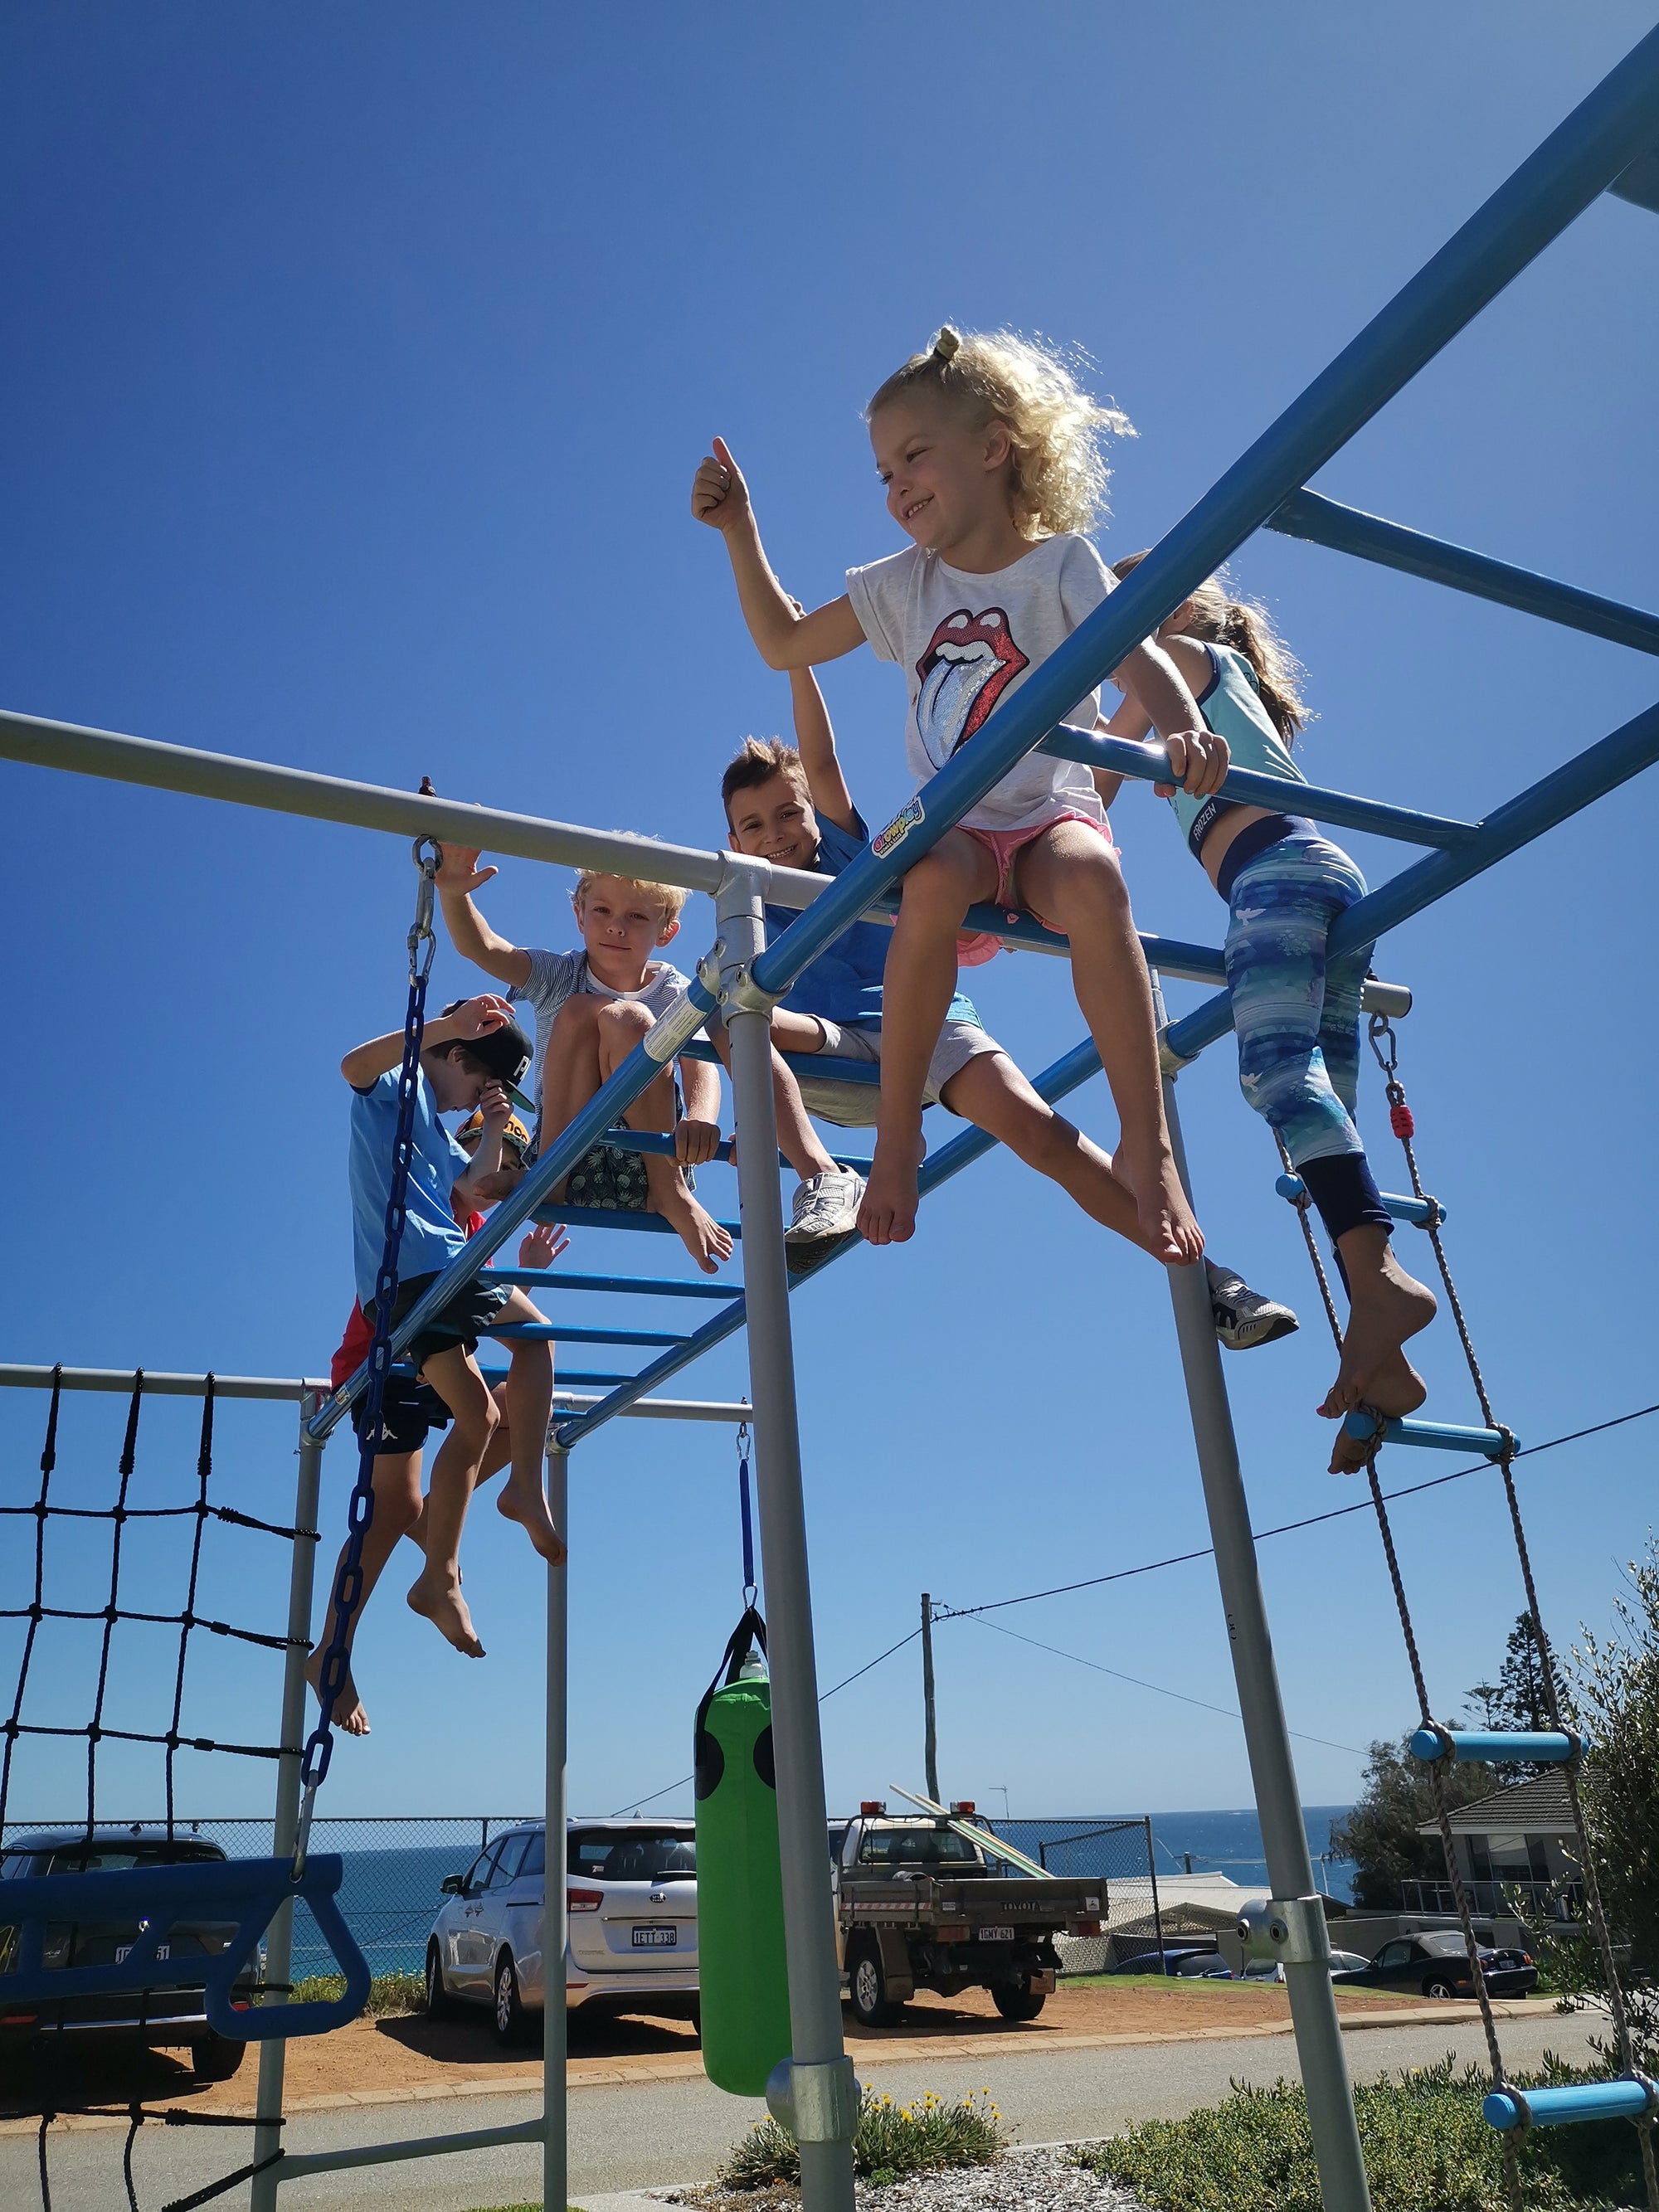 Monkey Bar Safety: How to Ensure Your Kids Are Safe